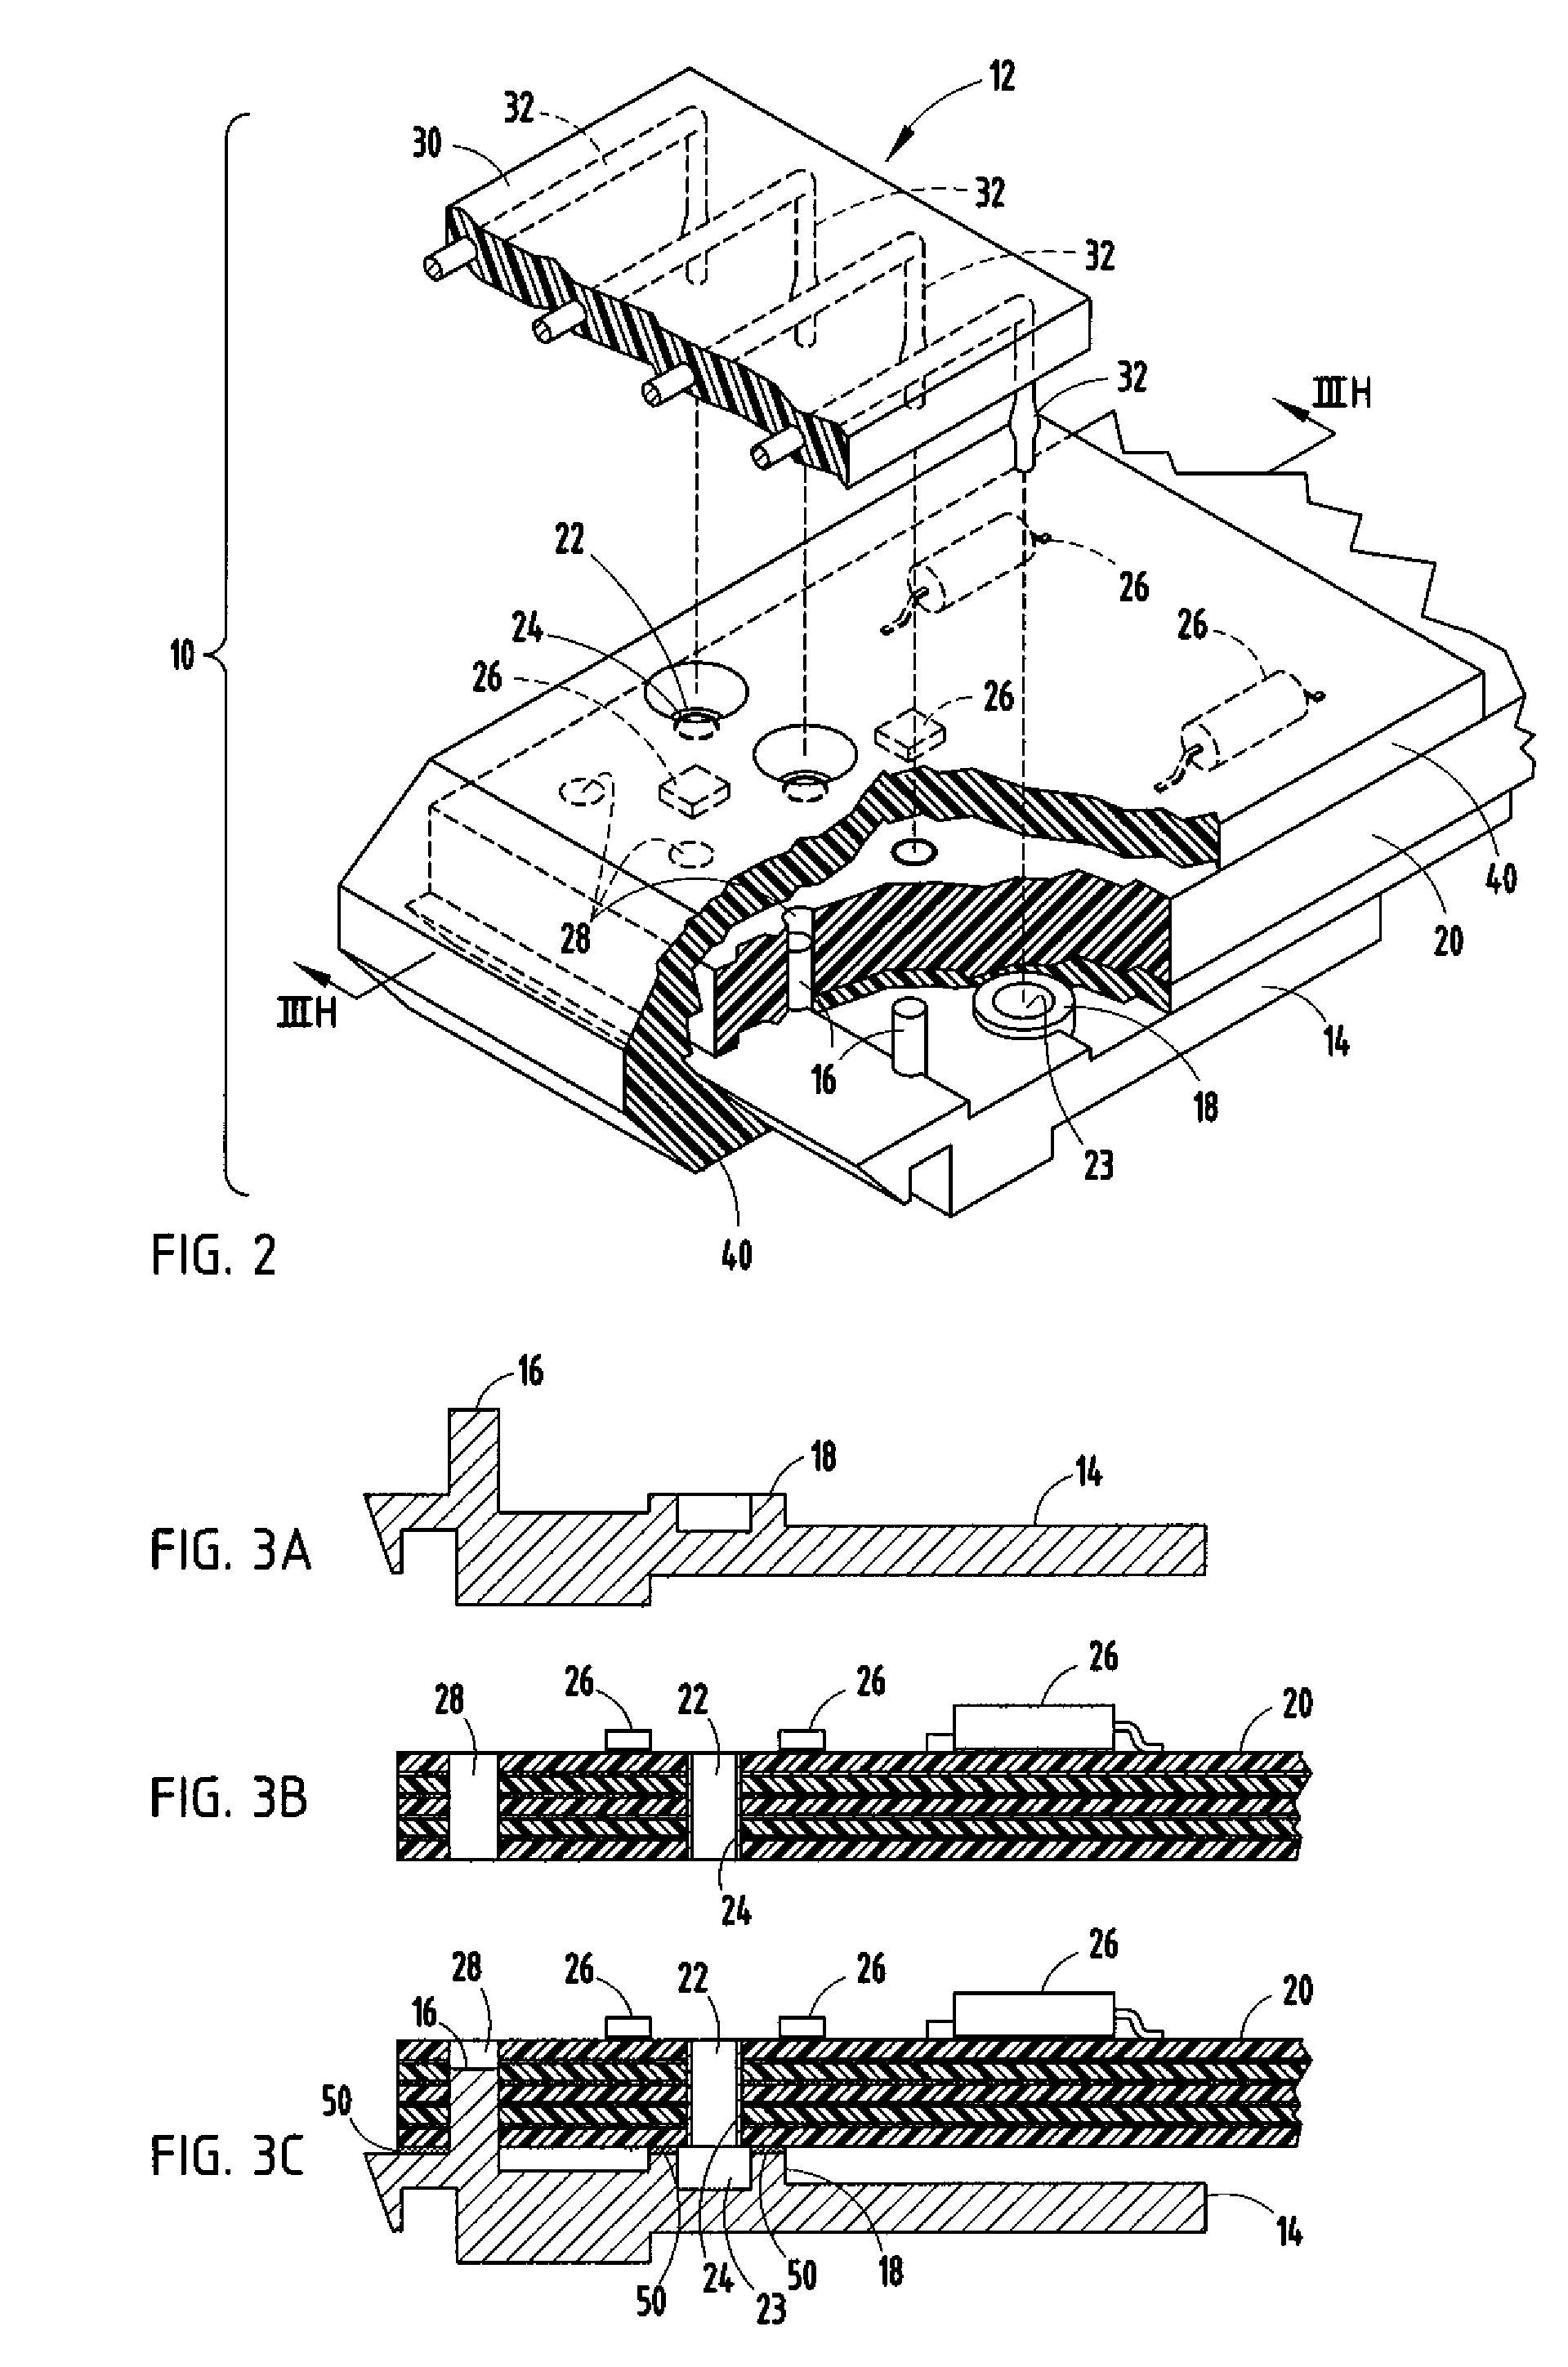 Electronics enclosure and method of fabricating an electronics enclosure